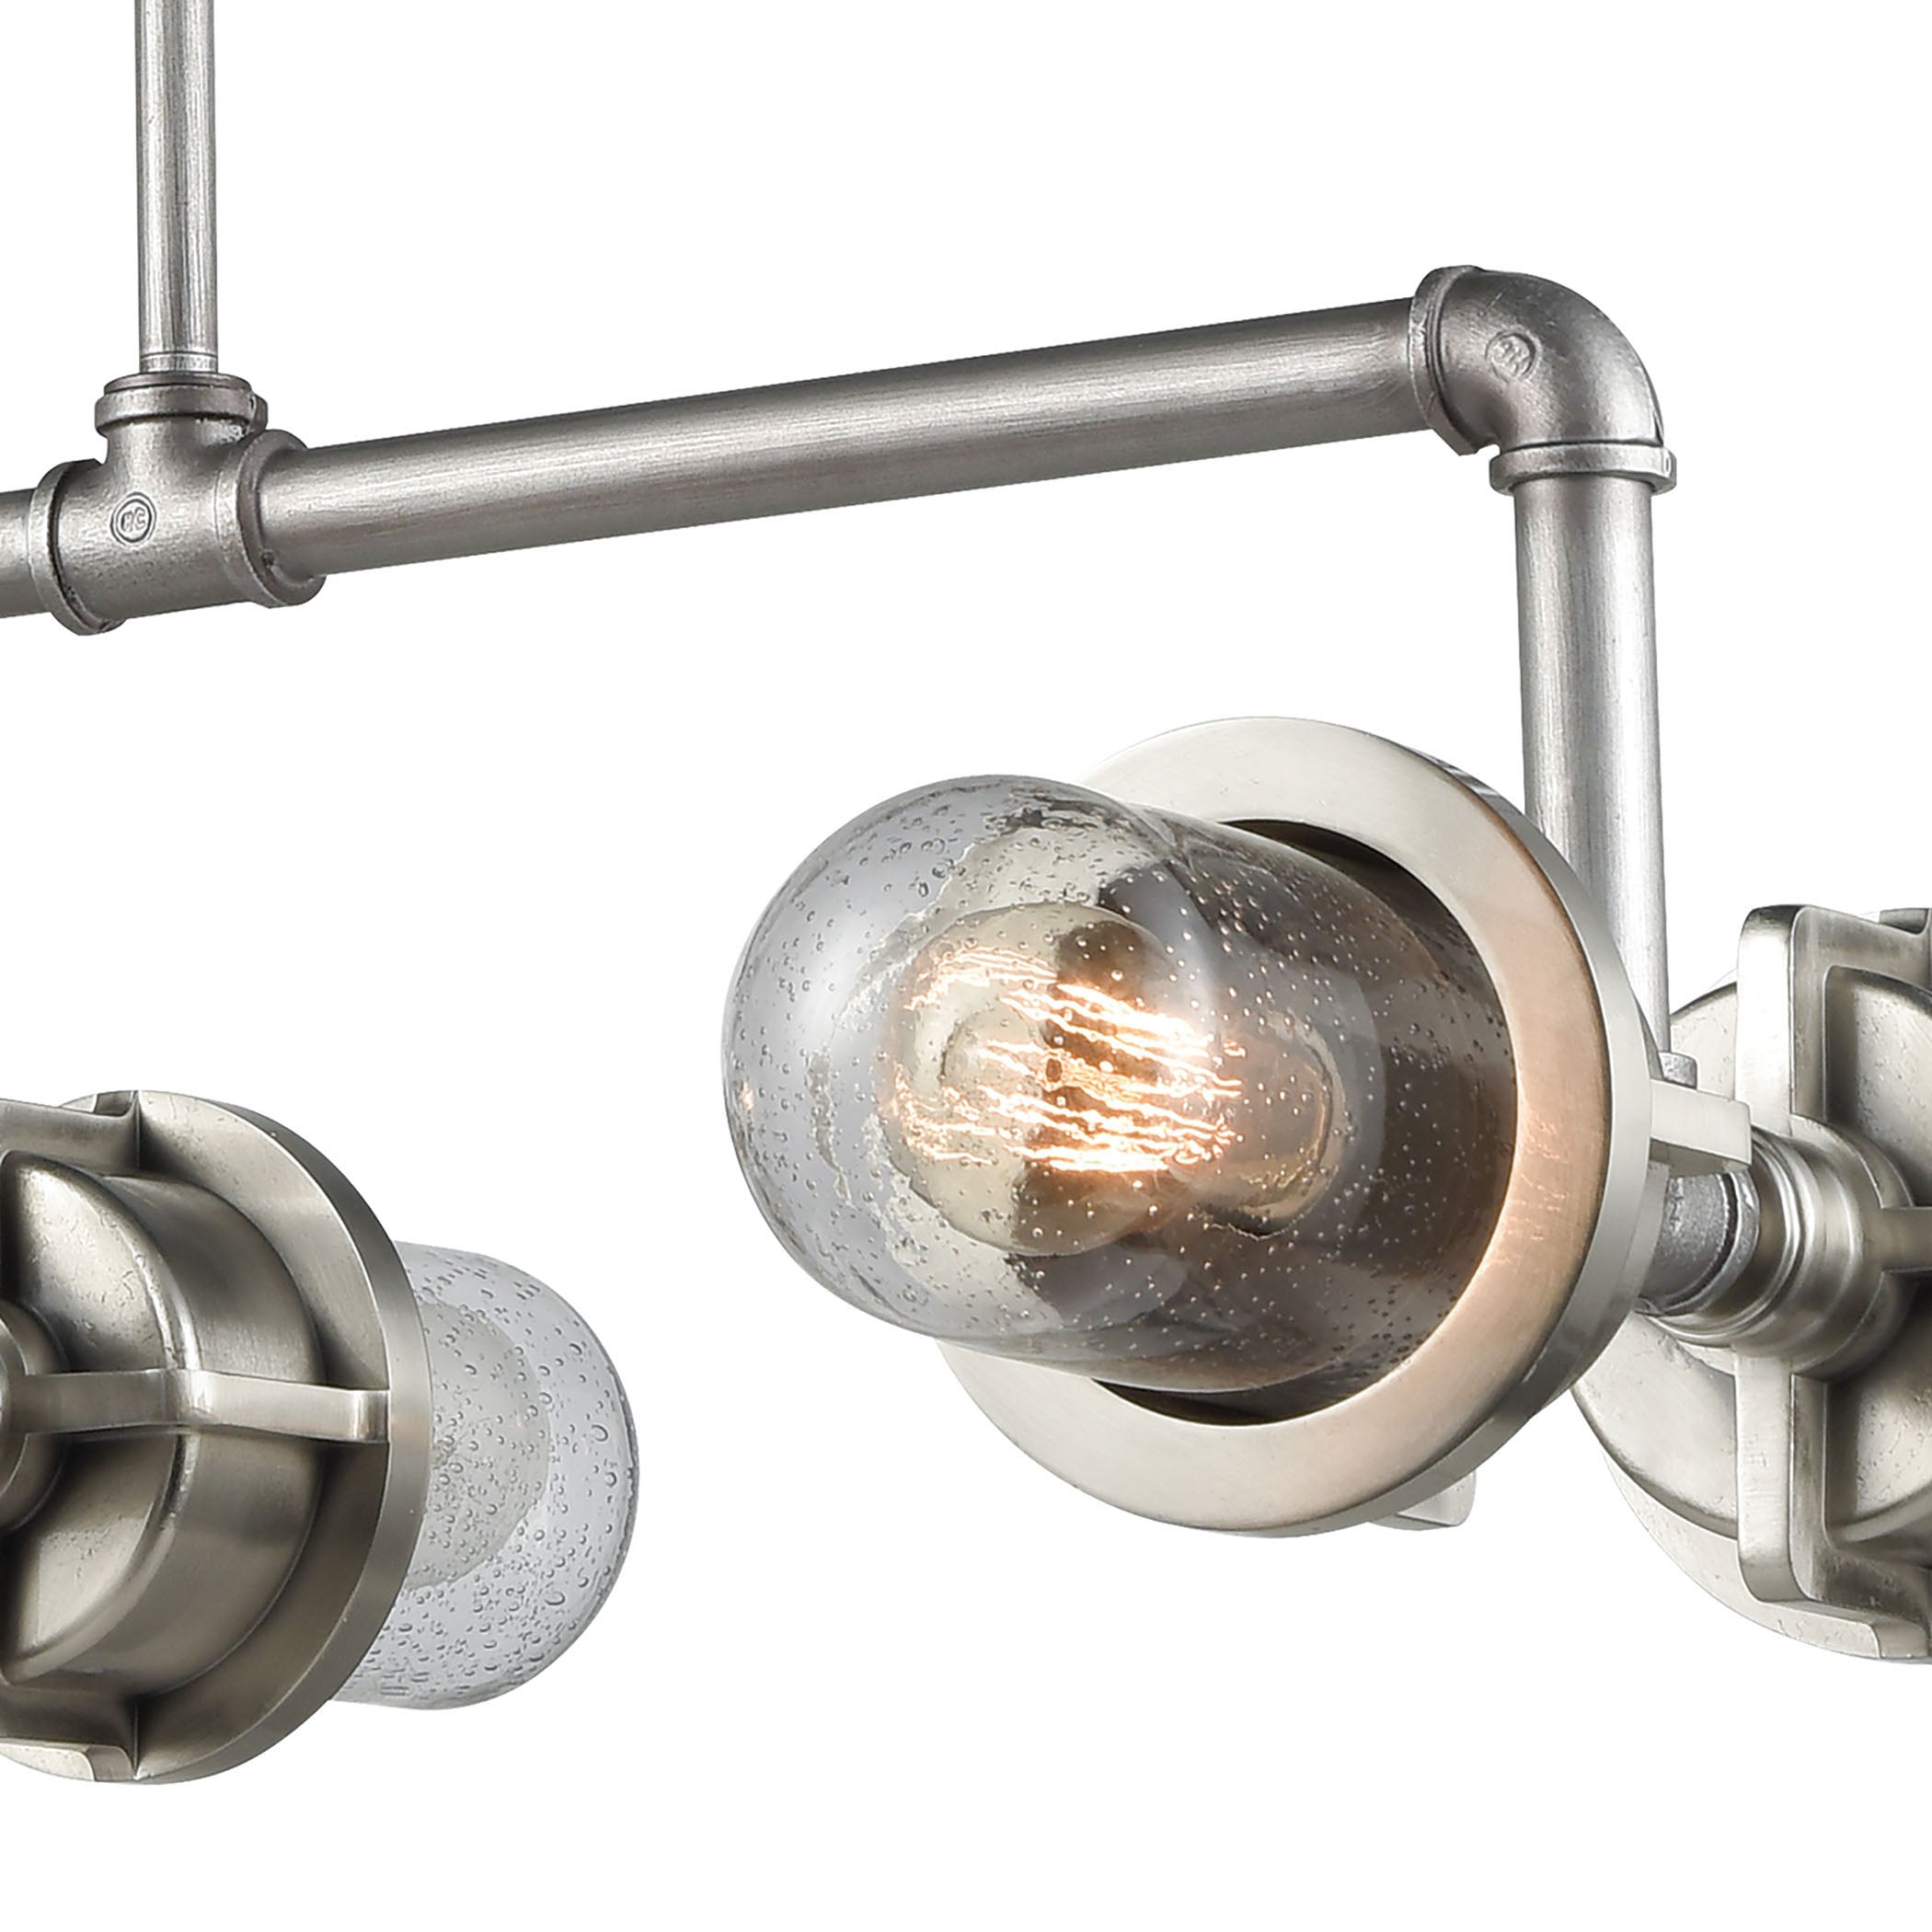 ELK Lighting 16504/6 Briggs 6-Light Linear Chandelier in Weathered Zinc and Satin Nickel with Seedy Glass